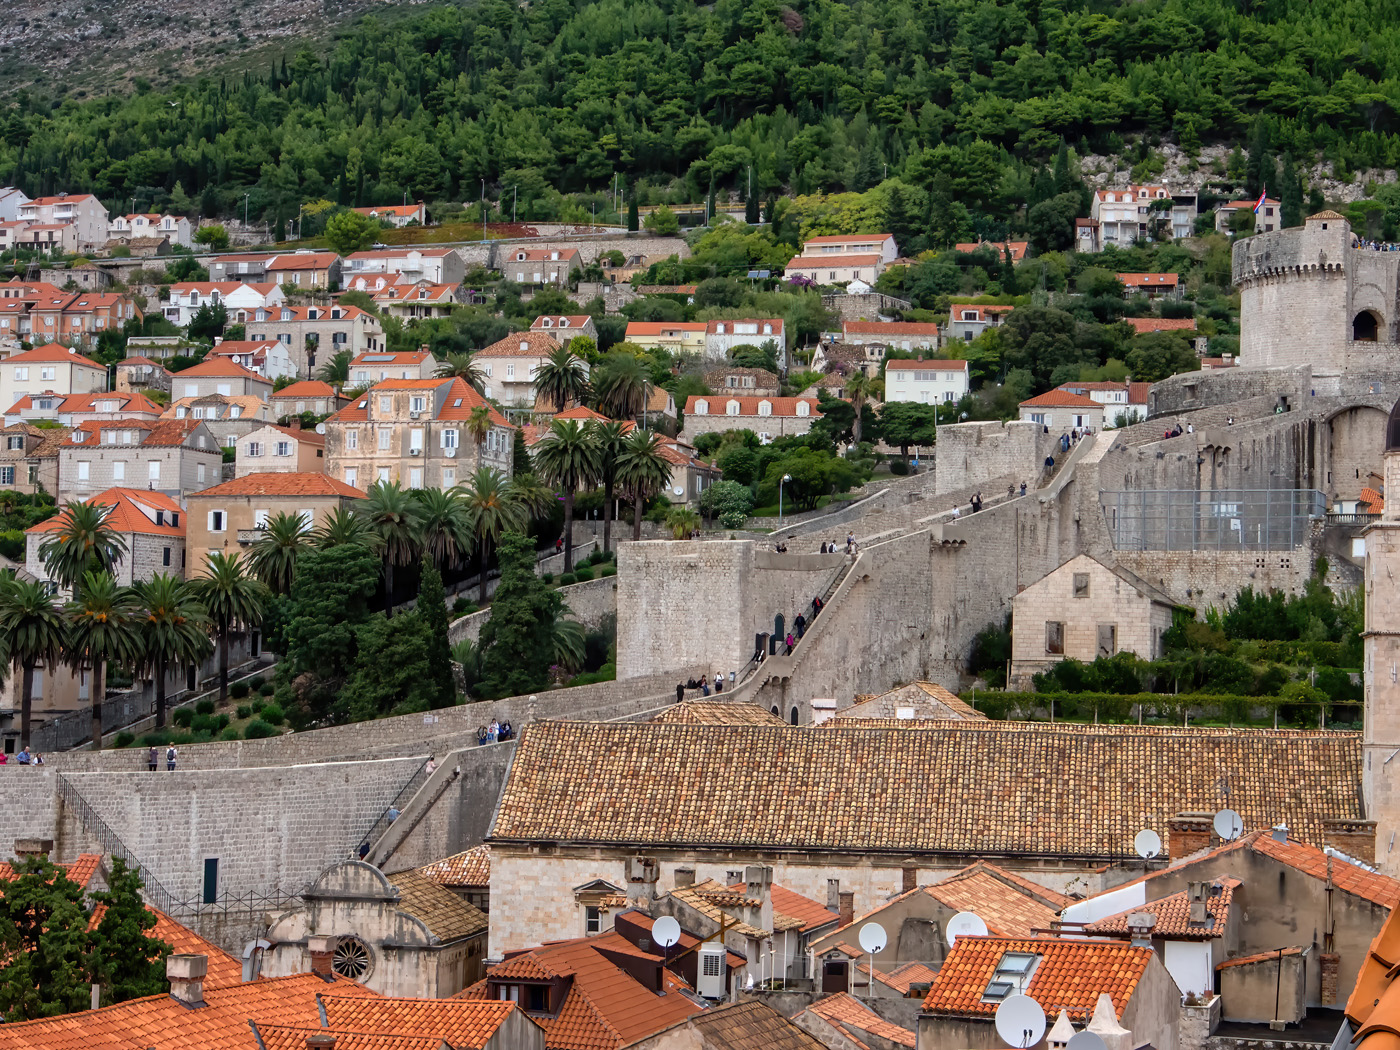 People on the Dubrovnik Wall by Judy Burr